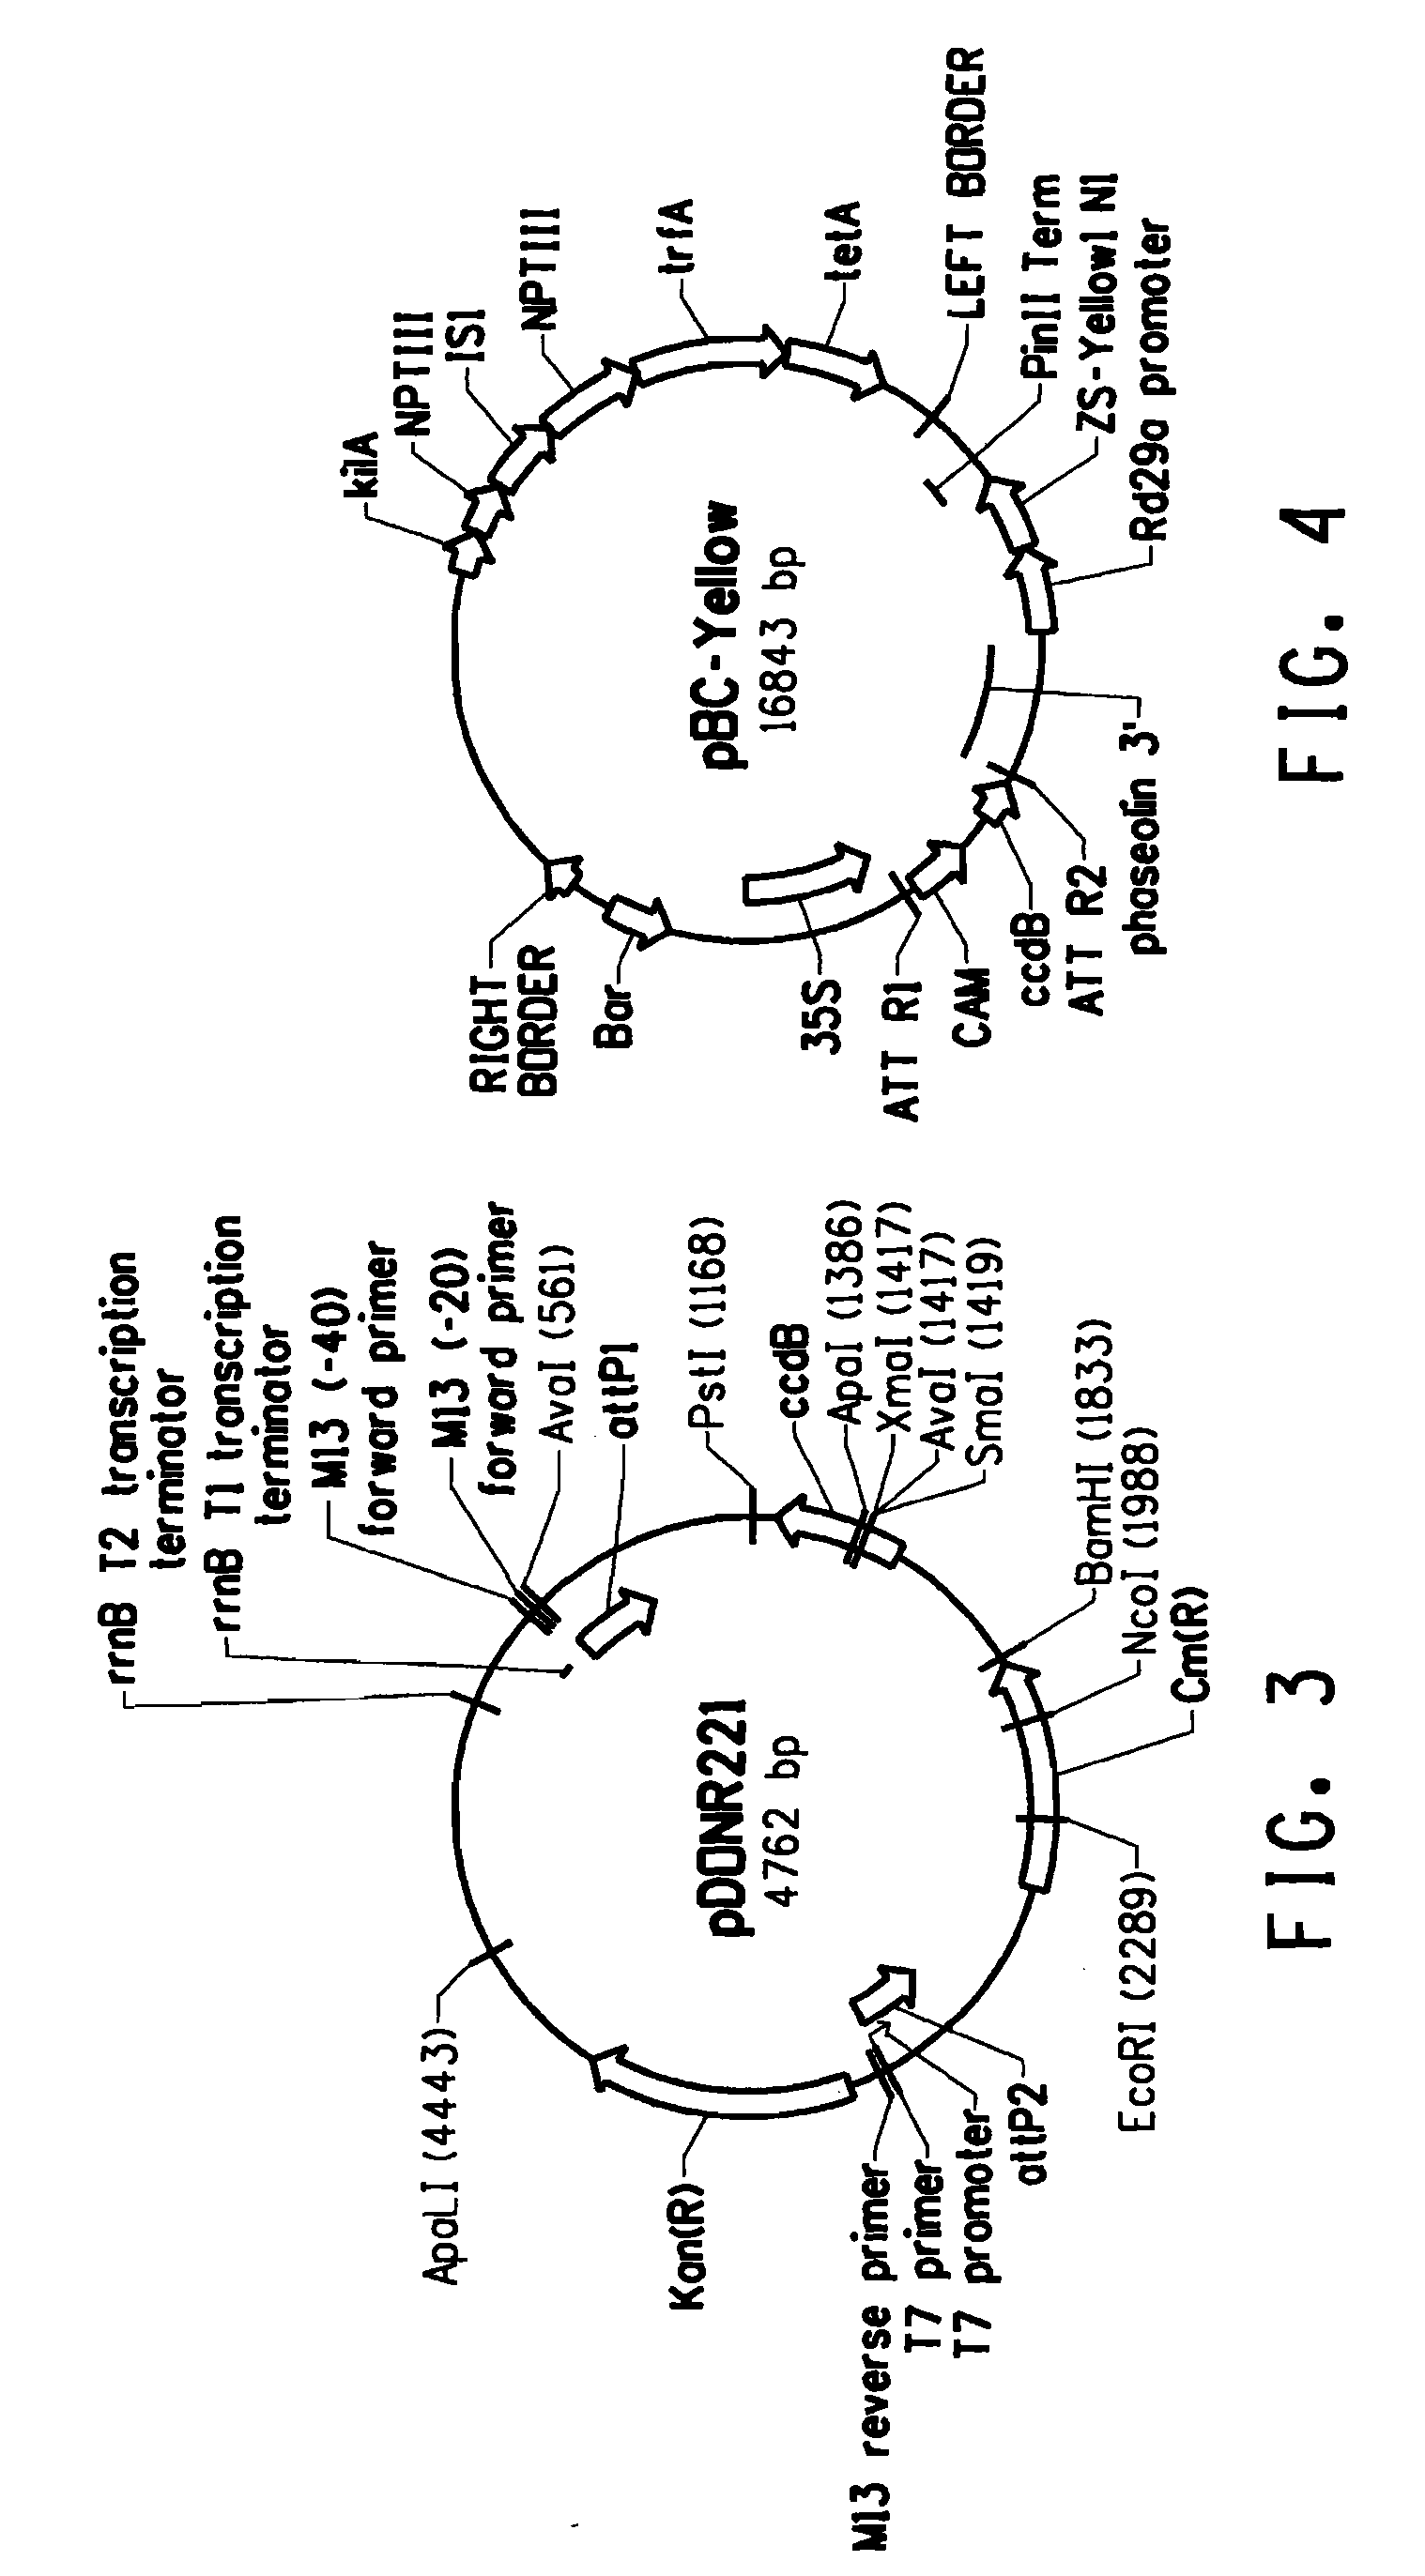 Plants with altered root architecture, related constructs and methods involving genes encoding nucleoside diphosphatase kinase (NDK) polypeptides and homologs thereof